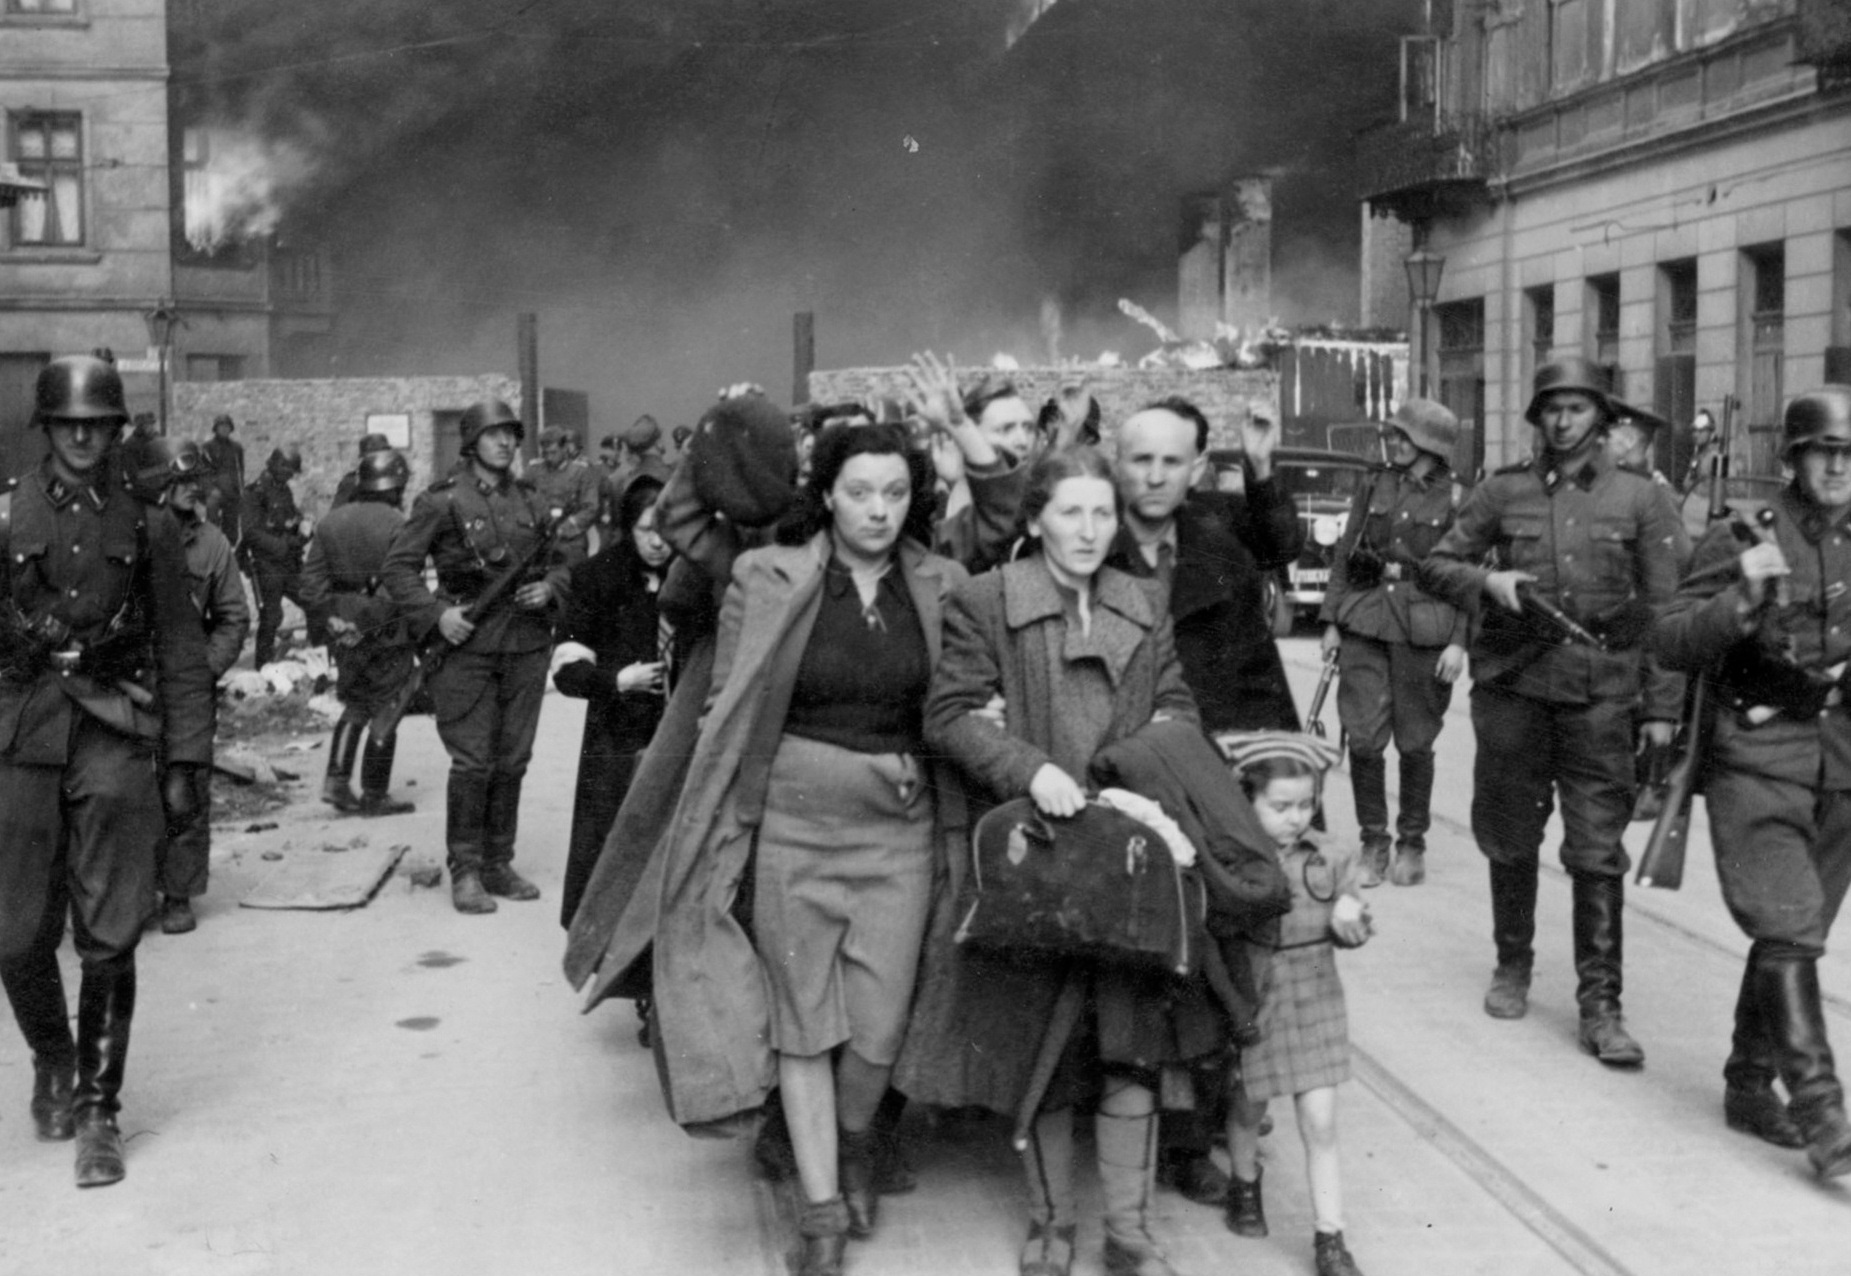 Yehudit Neyer (dark-haired woman), madam Neyer (center), Avraham Neyer (next to child), and the rest of the Neyer family leading a column of Jews being marched out of the Warsaw ghetto gate for deportation, Warsaw, Poland, Apr-May 1943, photo 2 of 2